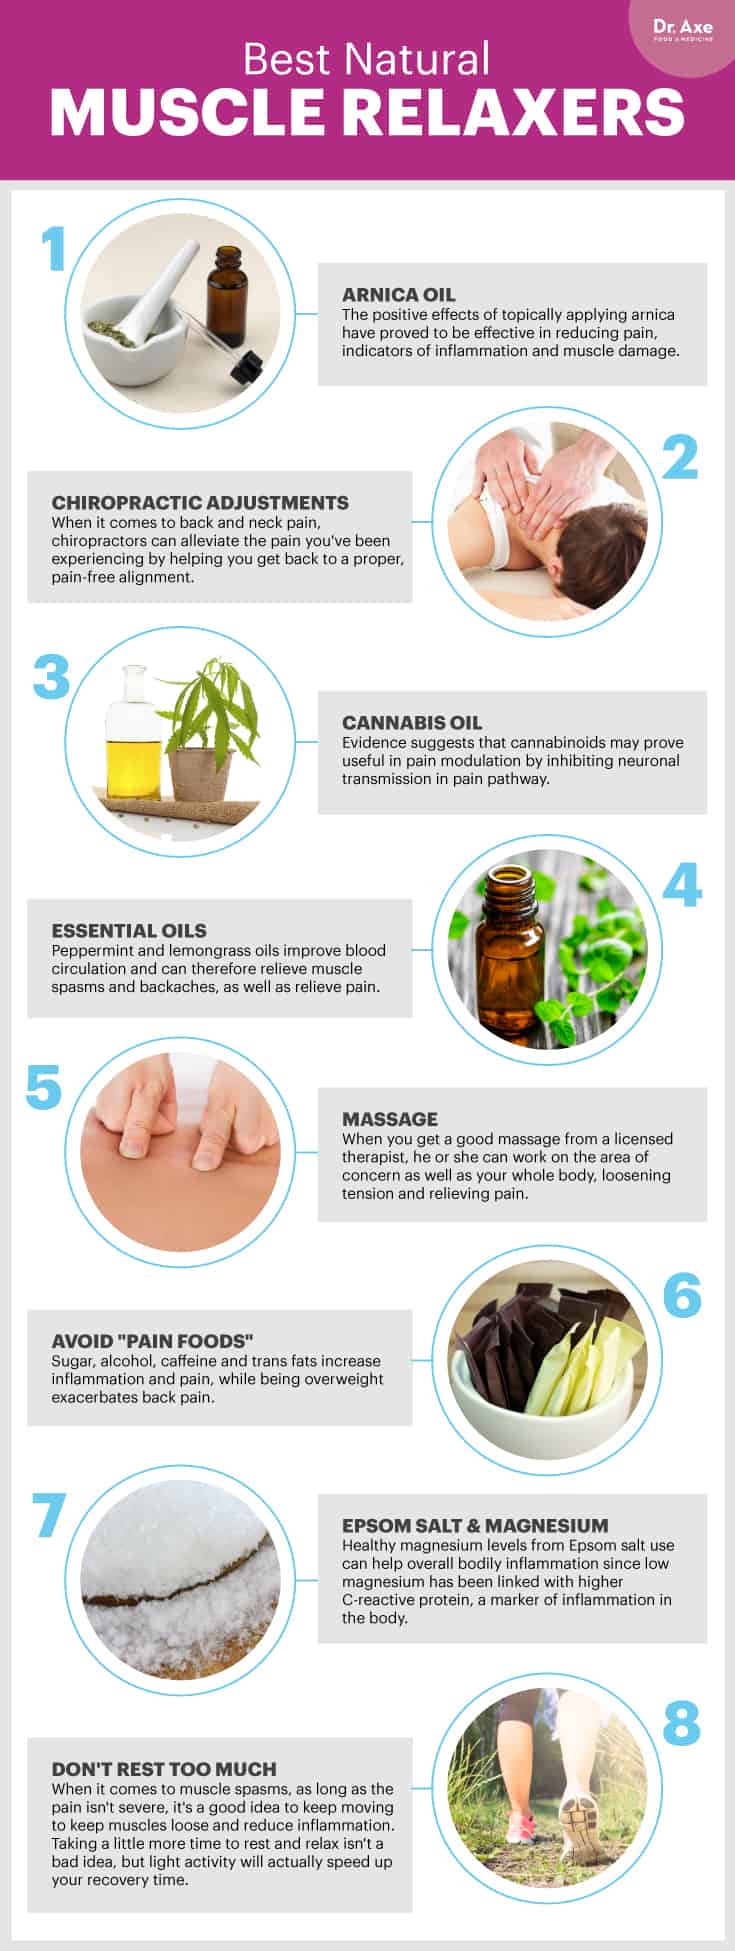 8 best natural muscle relaxers - Dr. Axe